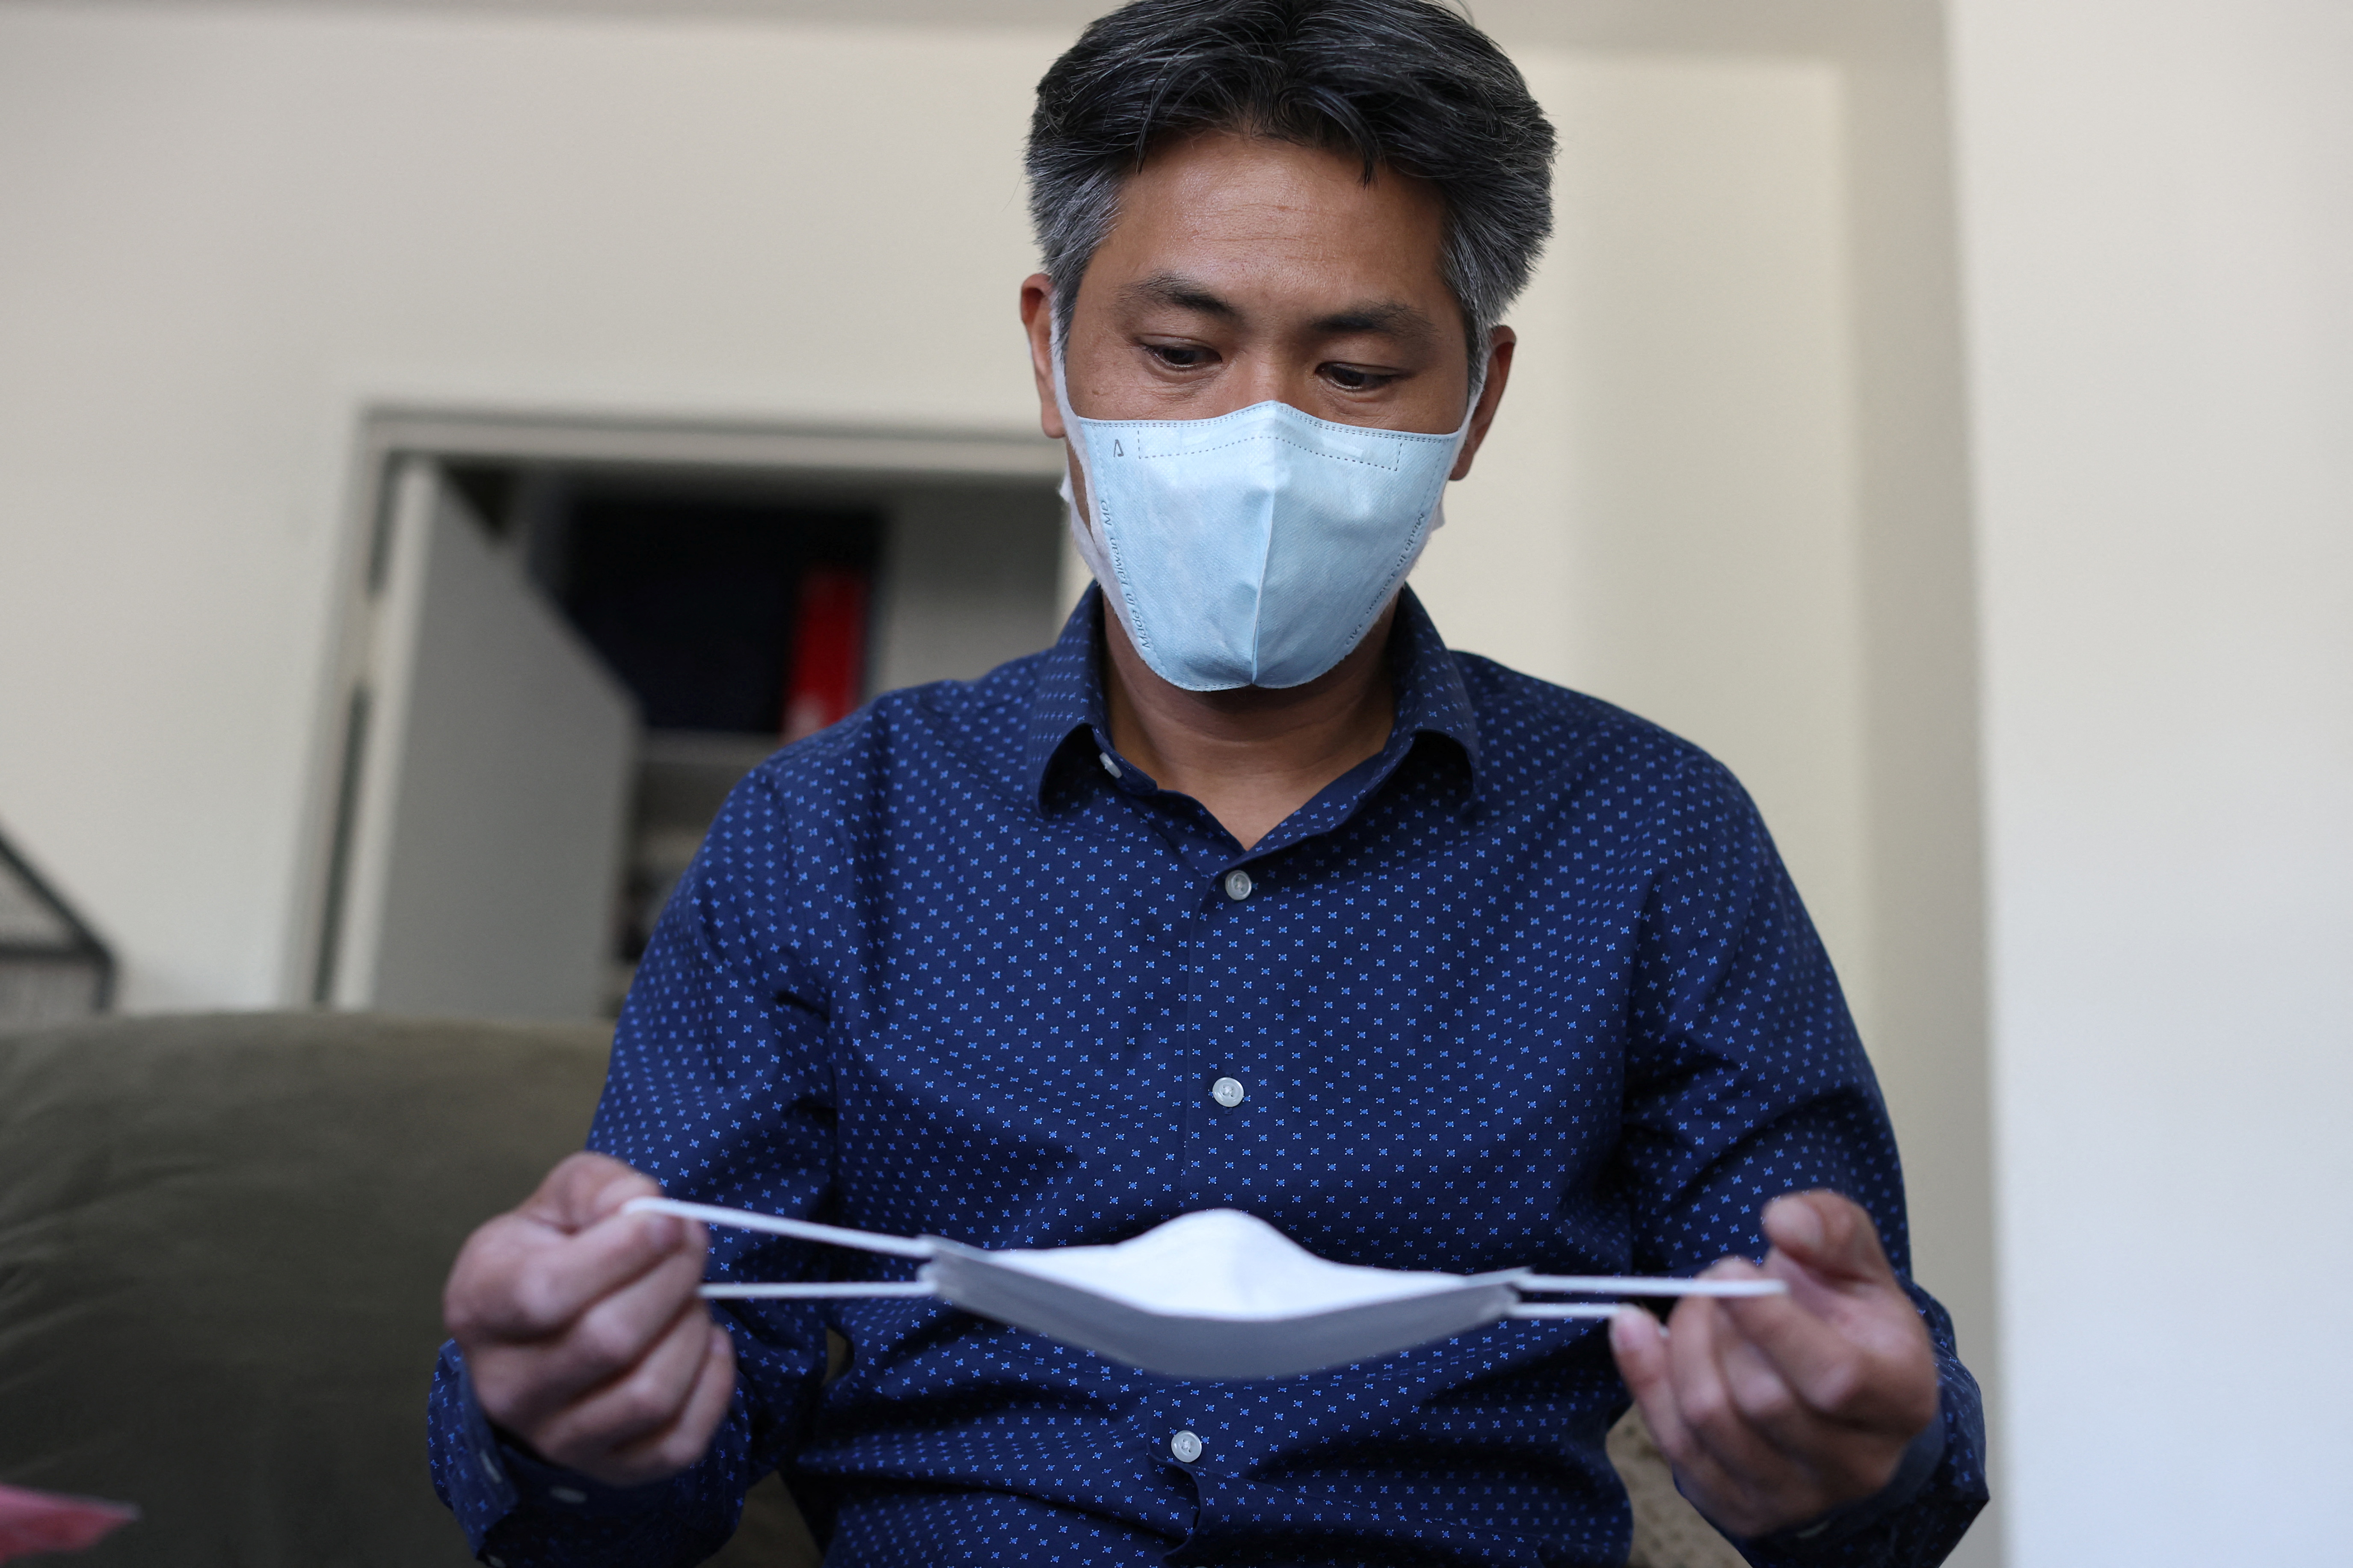 LA-based freight forwarder Tony Chen checks a kid-sized KF94 mask made in South Korea in his living room in South Pasadena